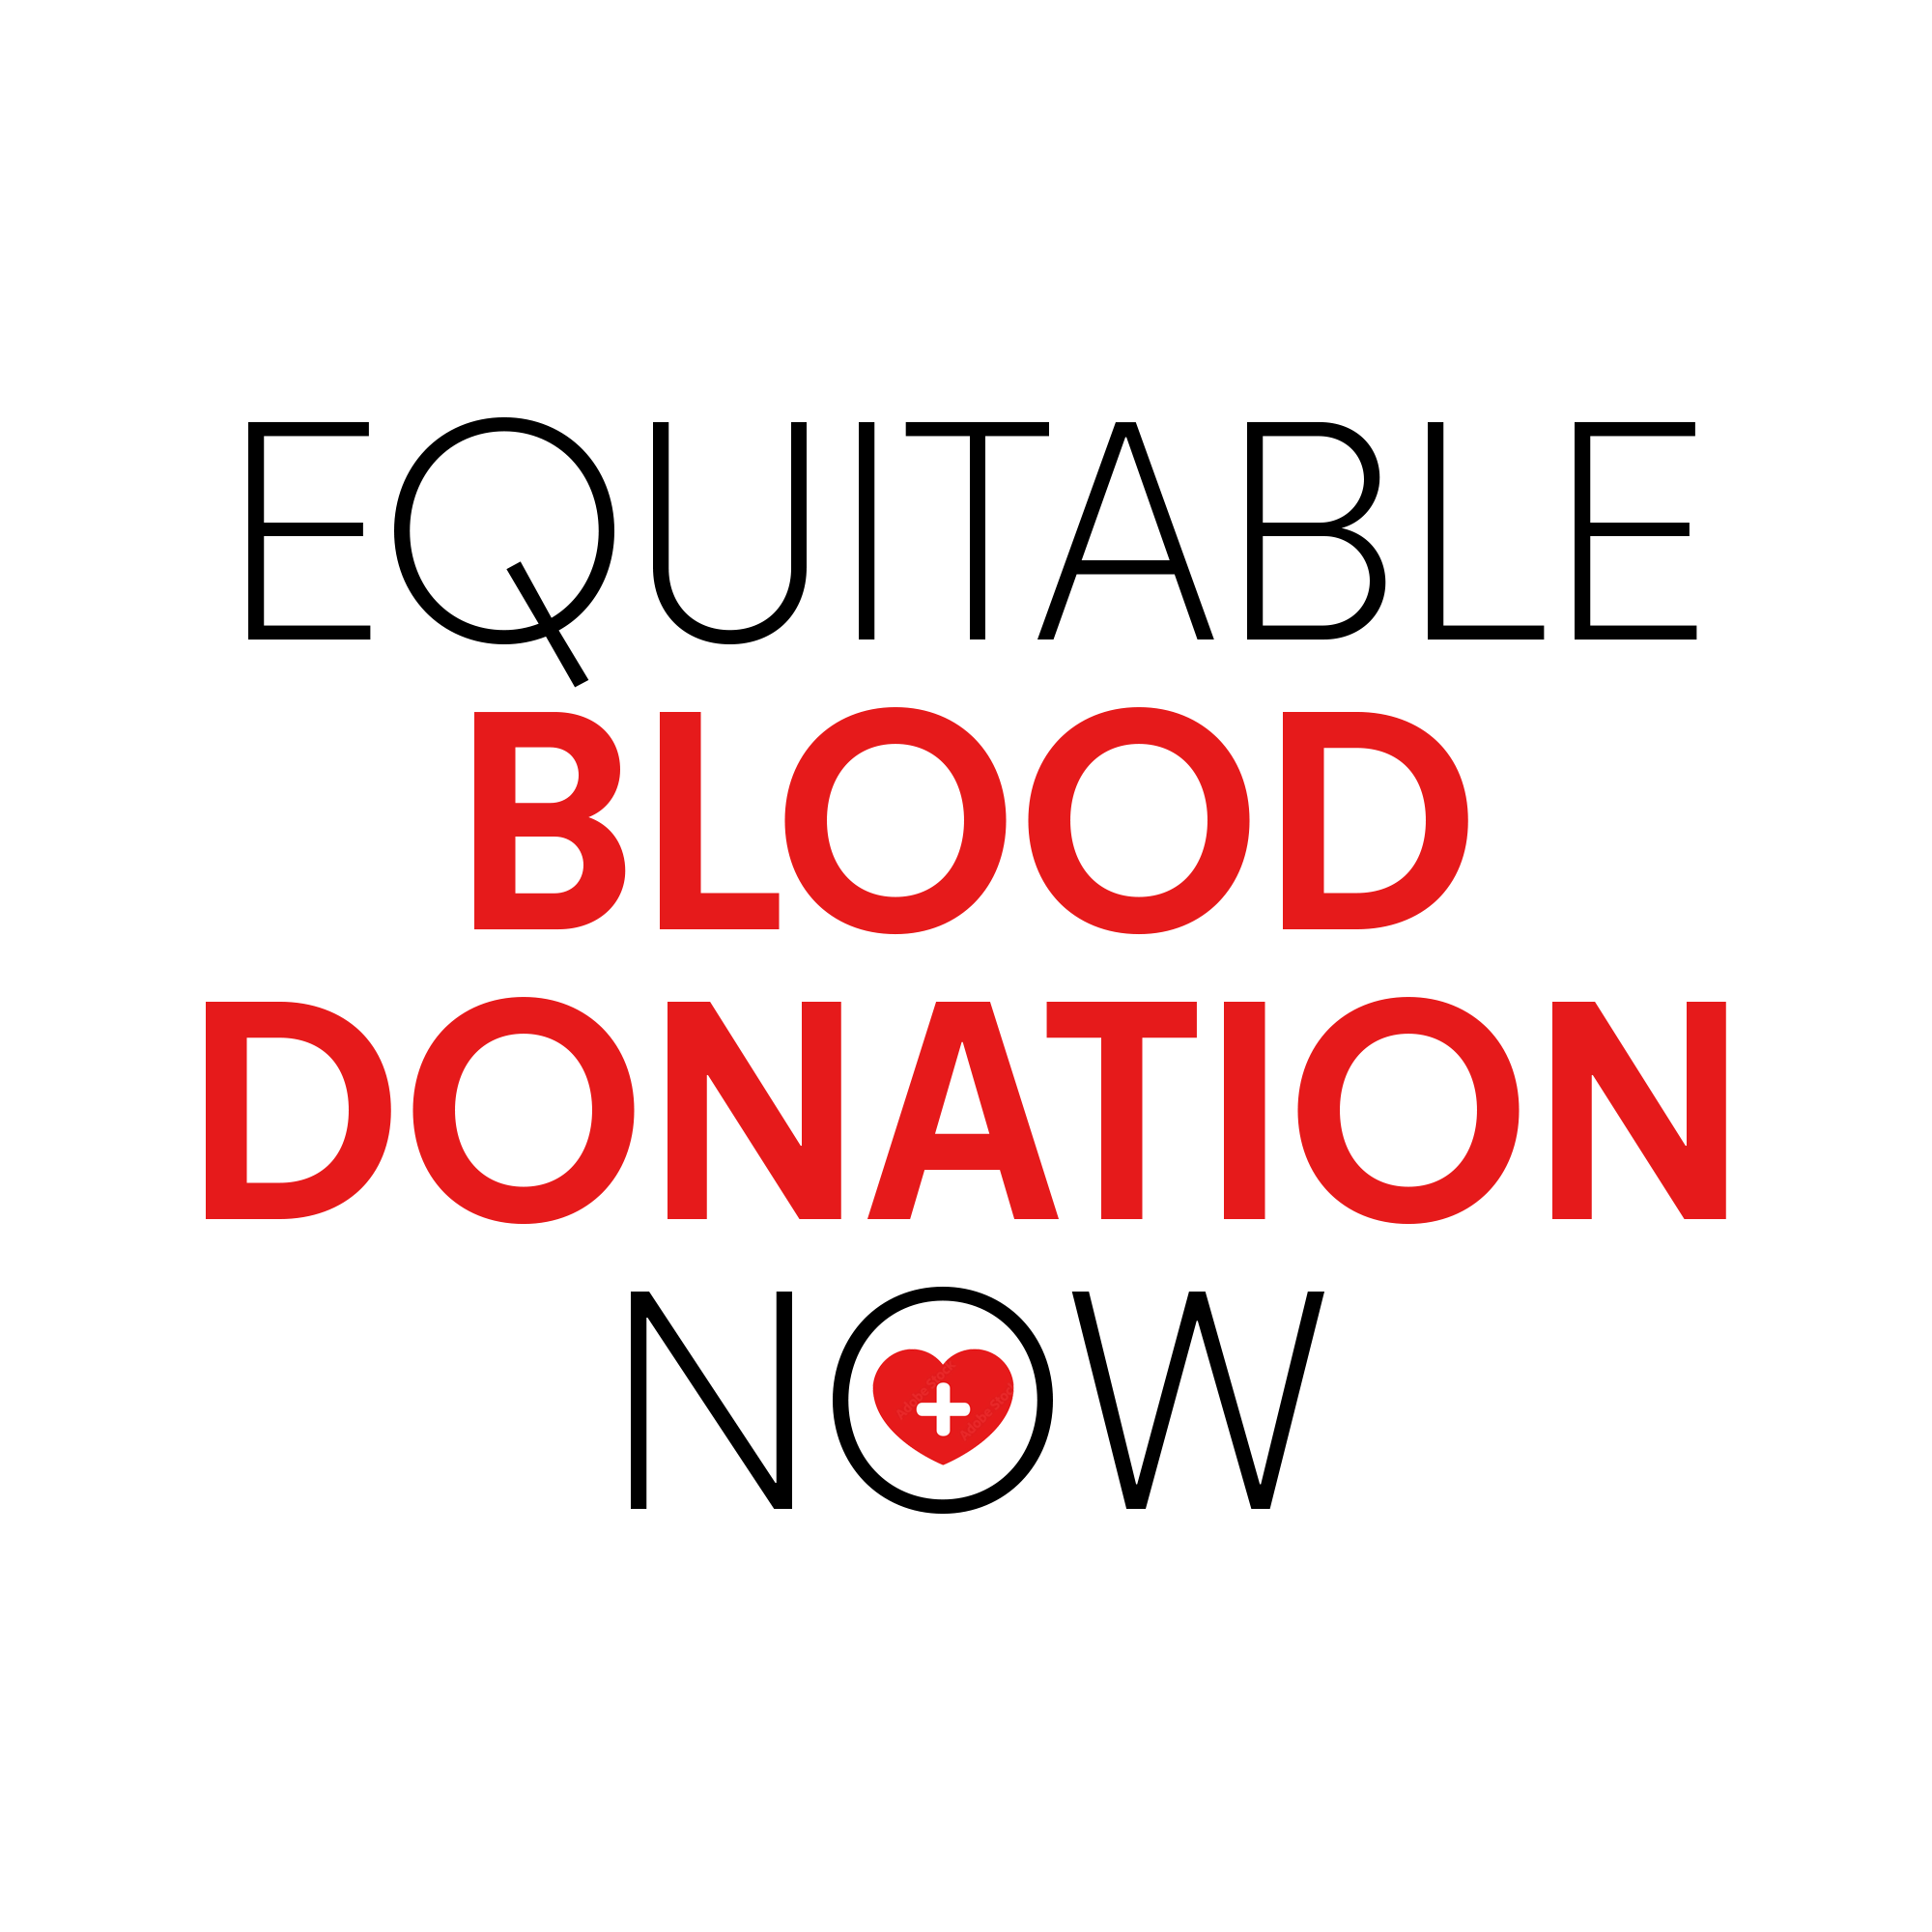 equitable blood donation now. red and black text. white background.